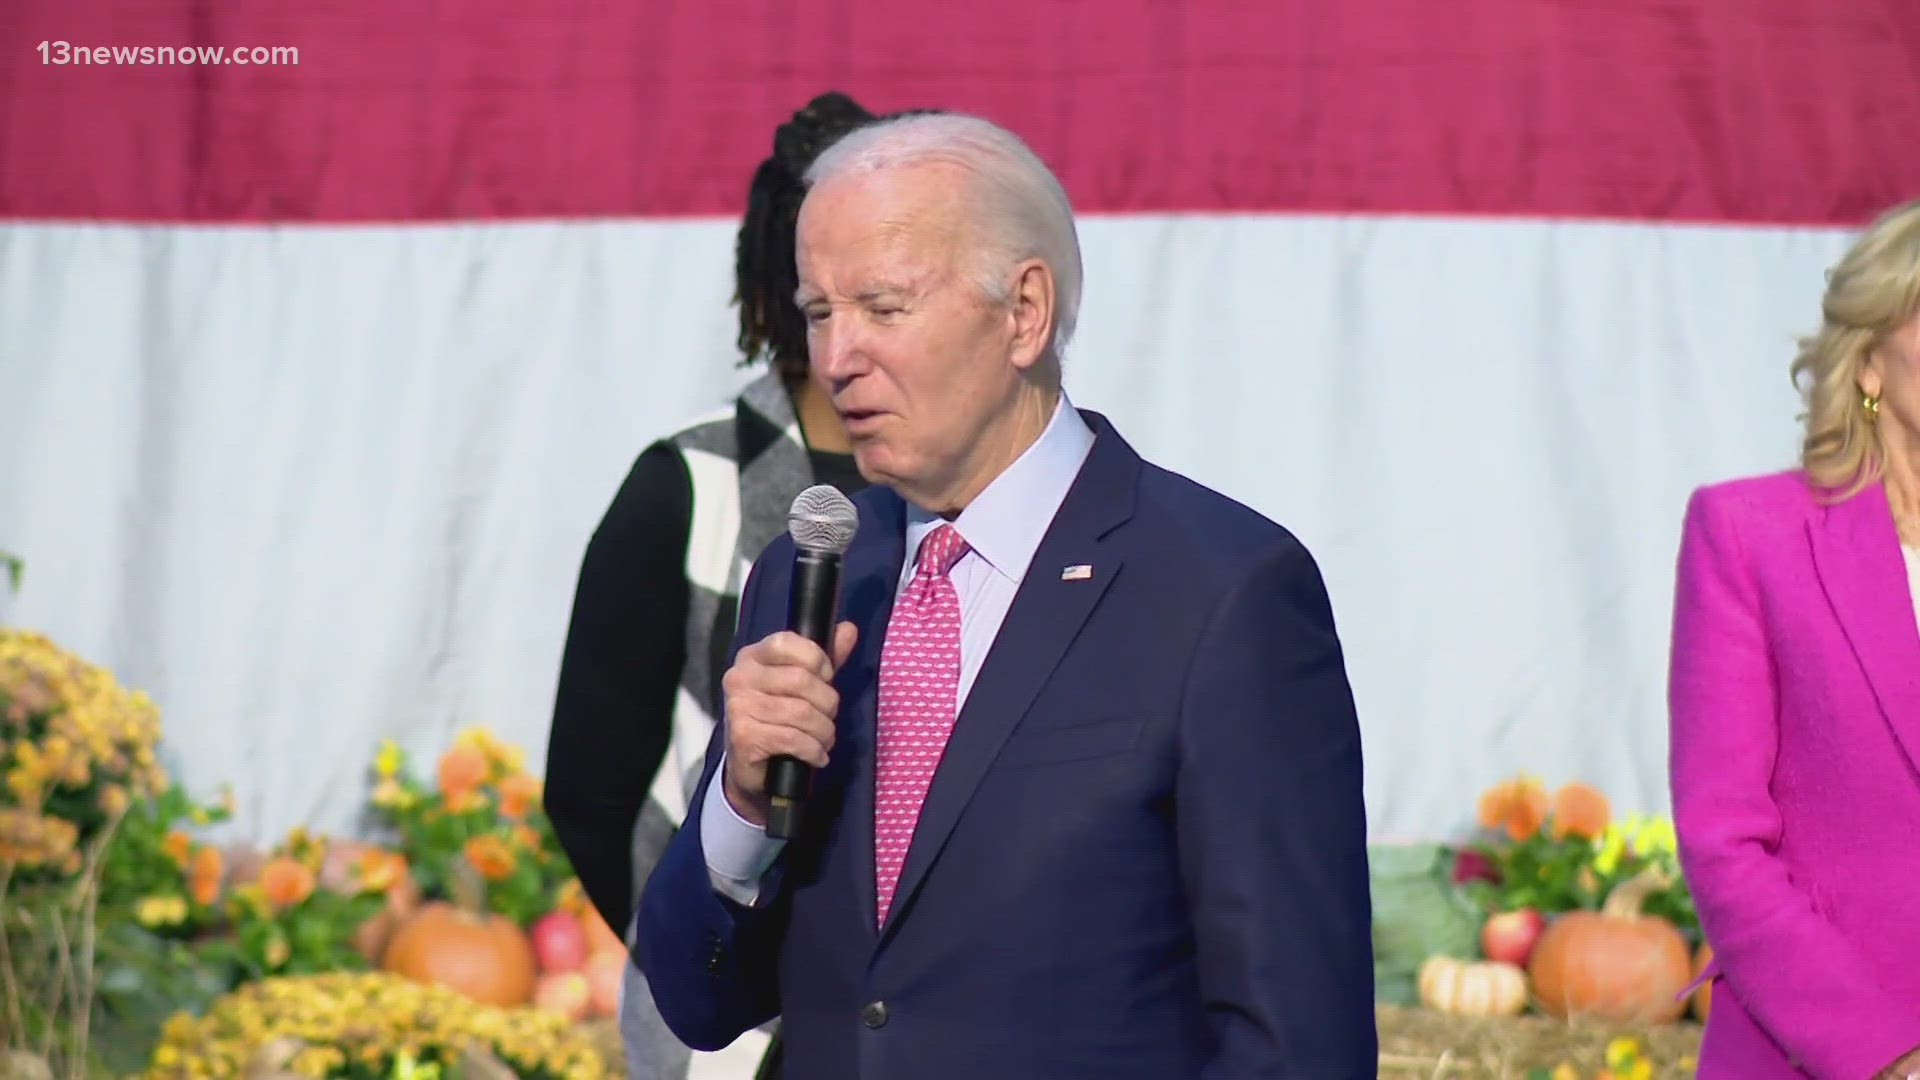 President Joe Biden and first lady Jill Biden made a stop in Hampton Roads on Sunday for an early Thanksgiving celebration with military personnel.